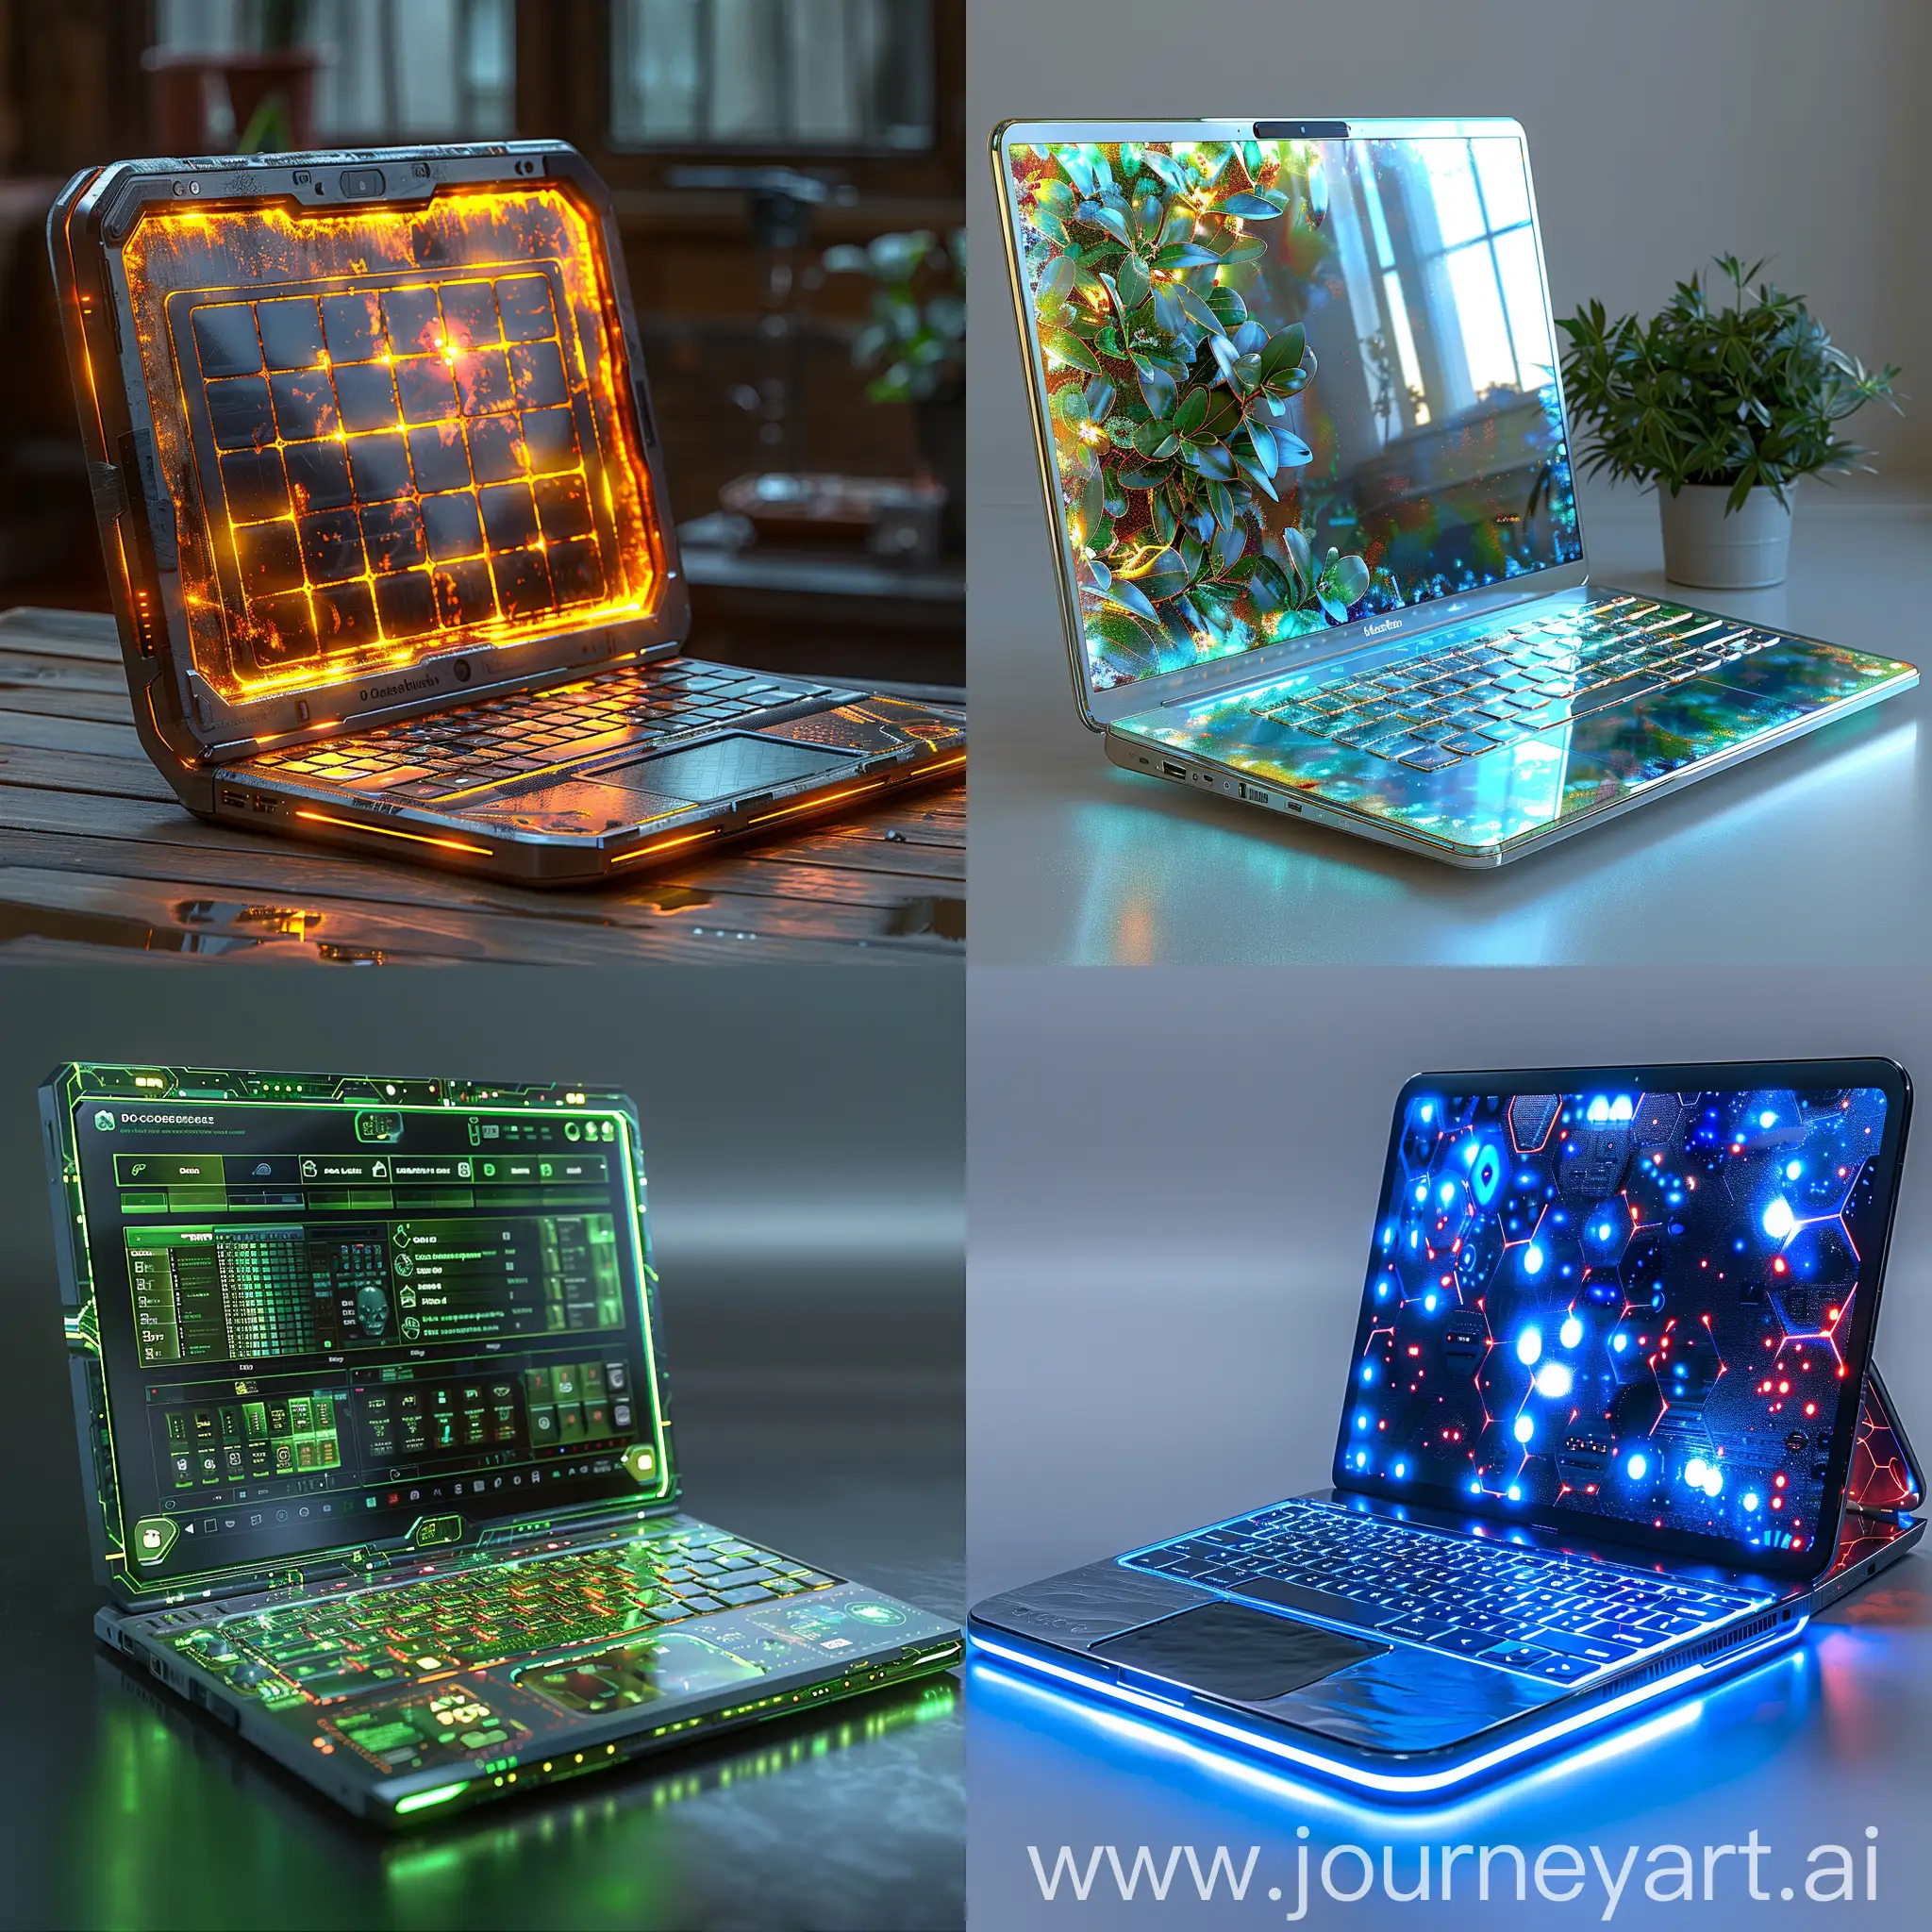 Sustainable-Futuristic-Laptop-with-Biodegradable-Materials-and-Energyefficient-Display